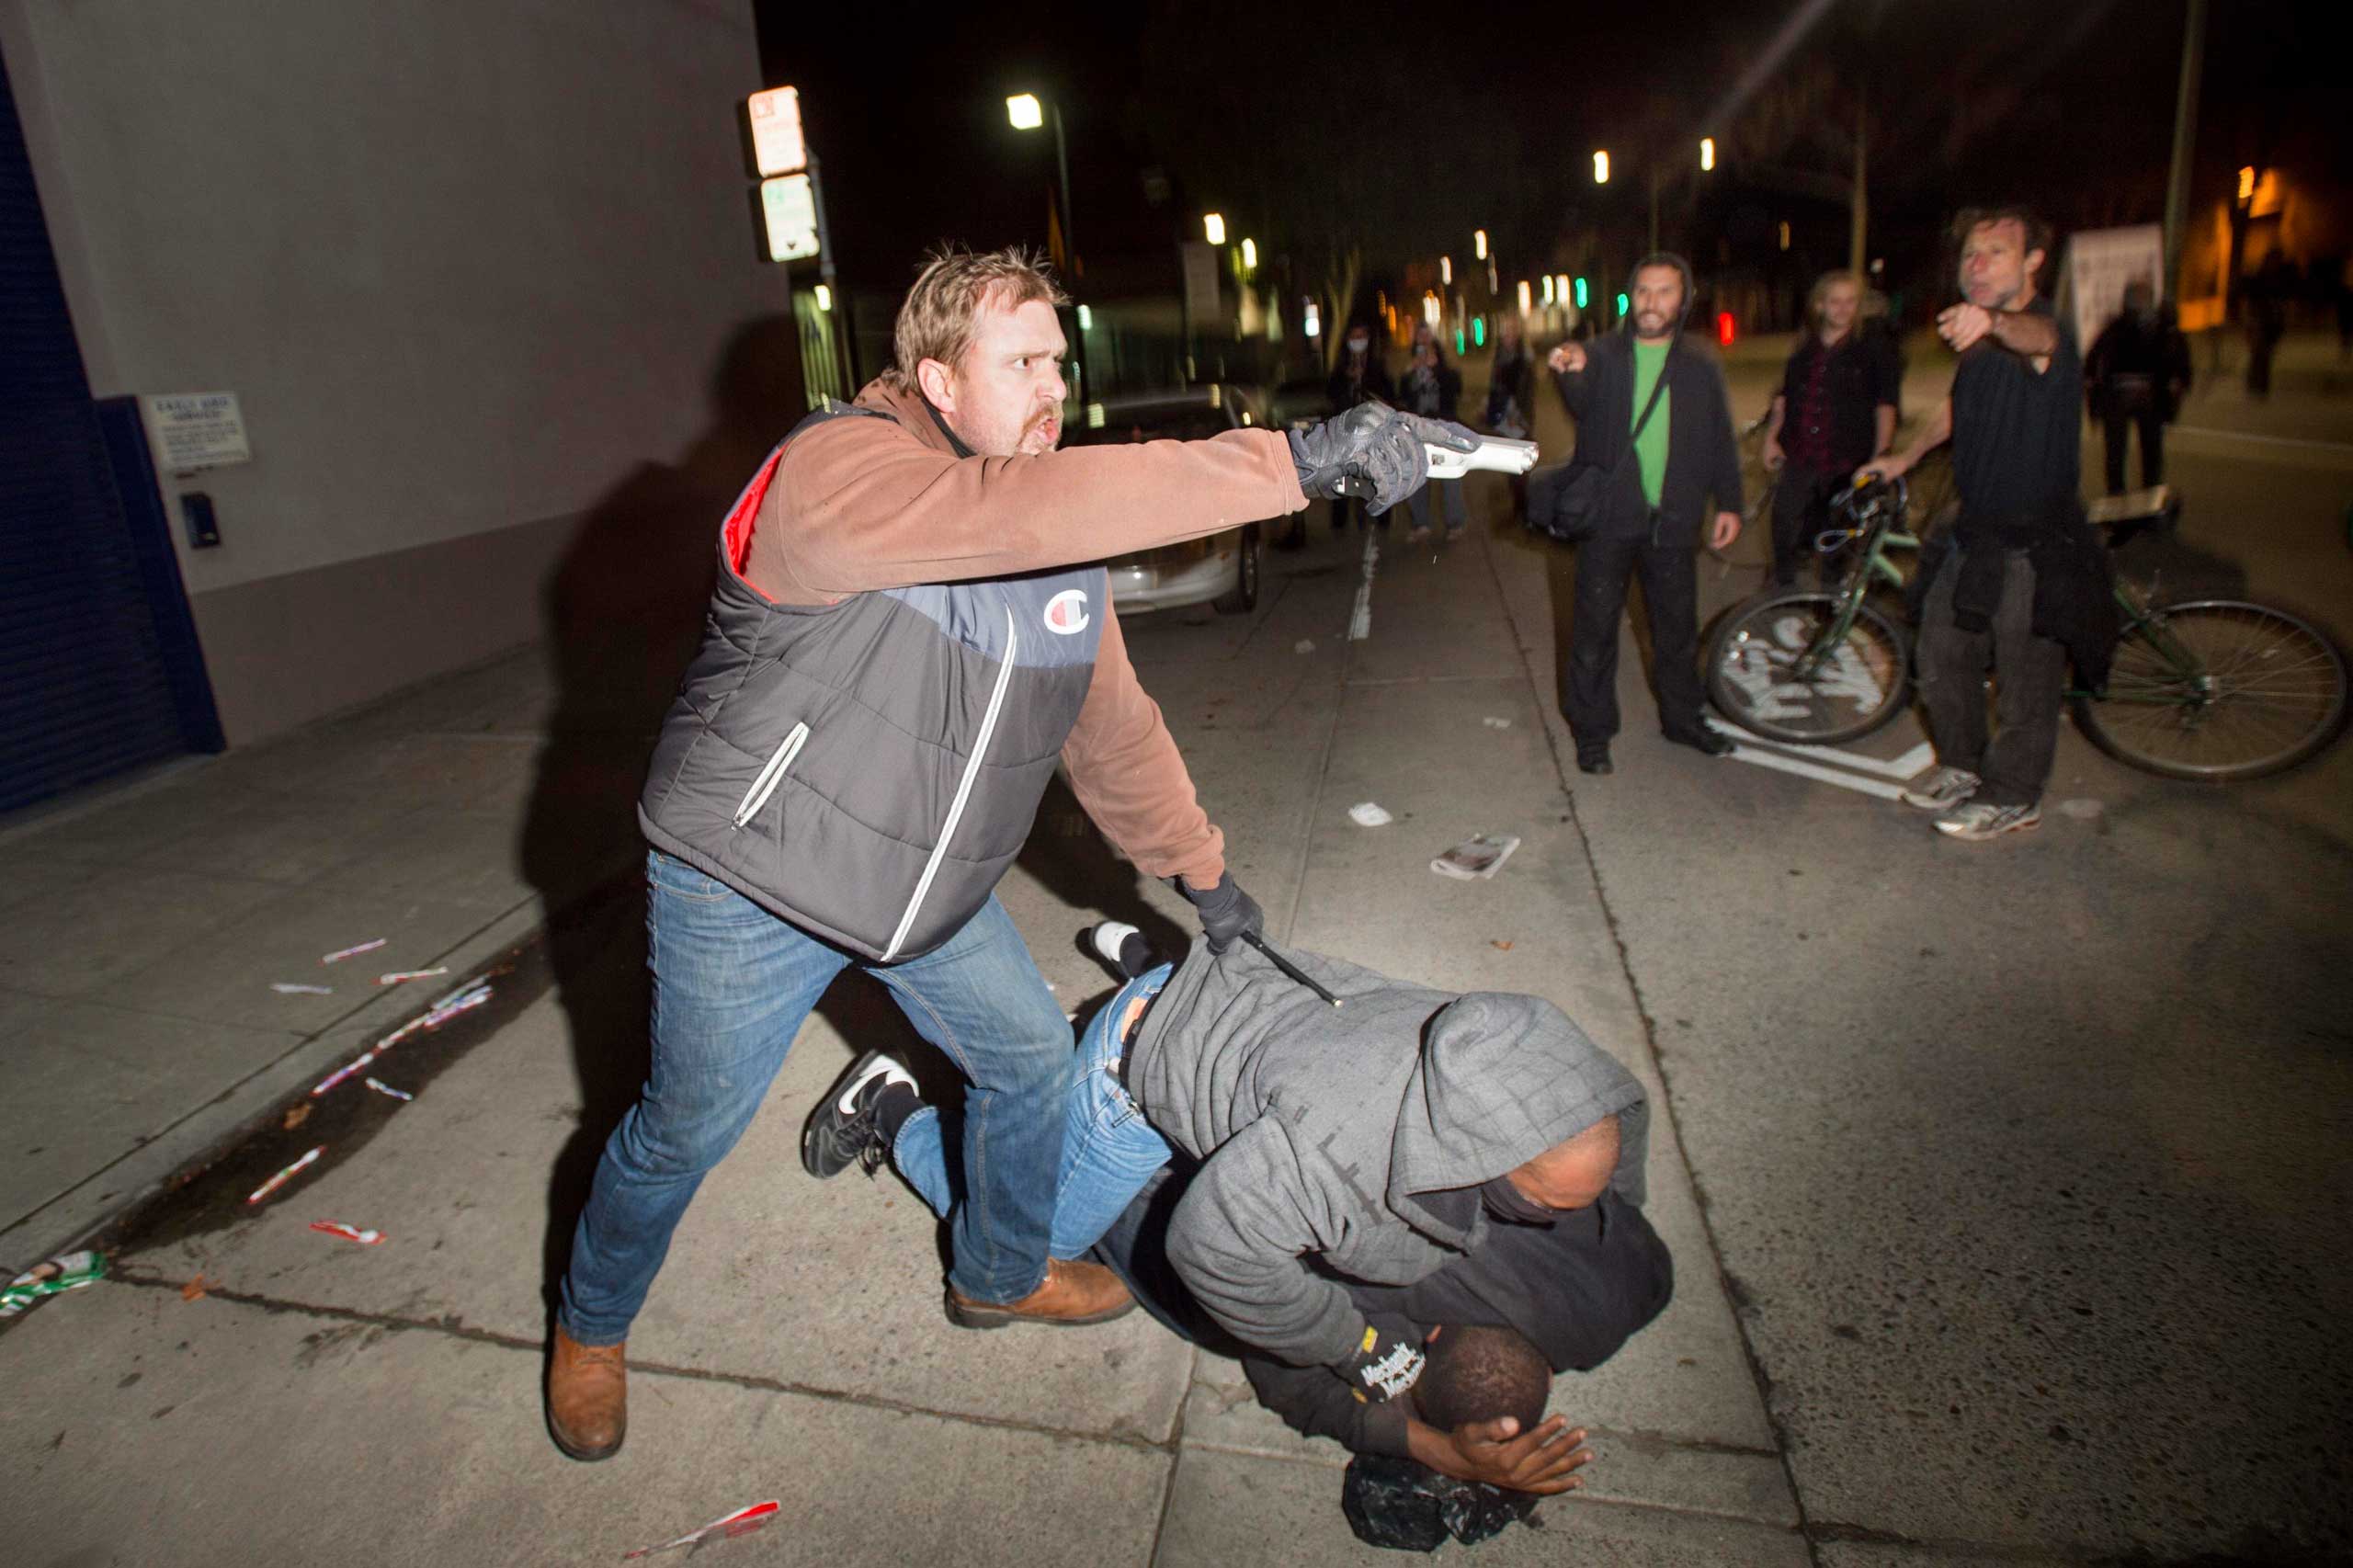 An undercover police officer aims his gun at protesters after some in the crowd attacked him and his partner in Oakland, Calif. on Dec. 10, 2014. (Noah Berger—Reuters)